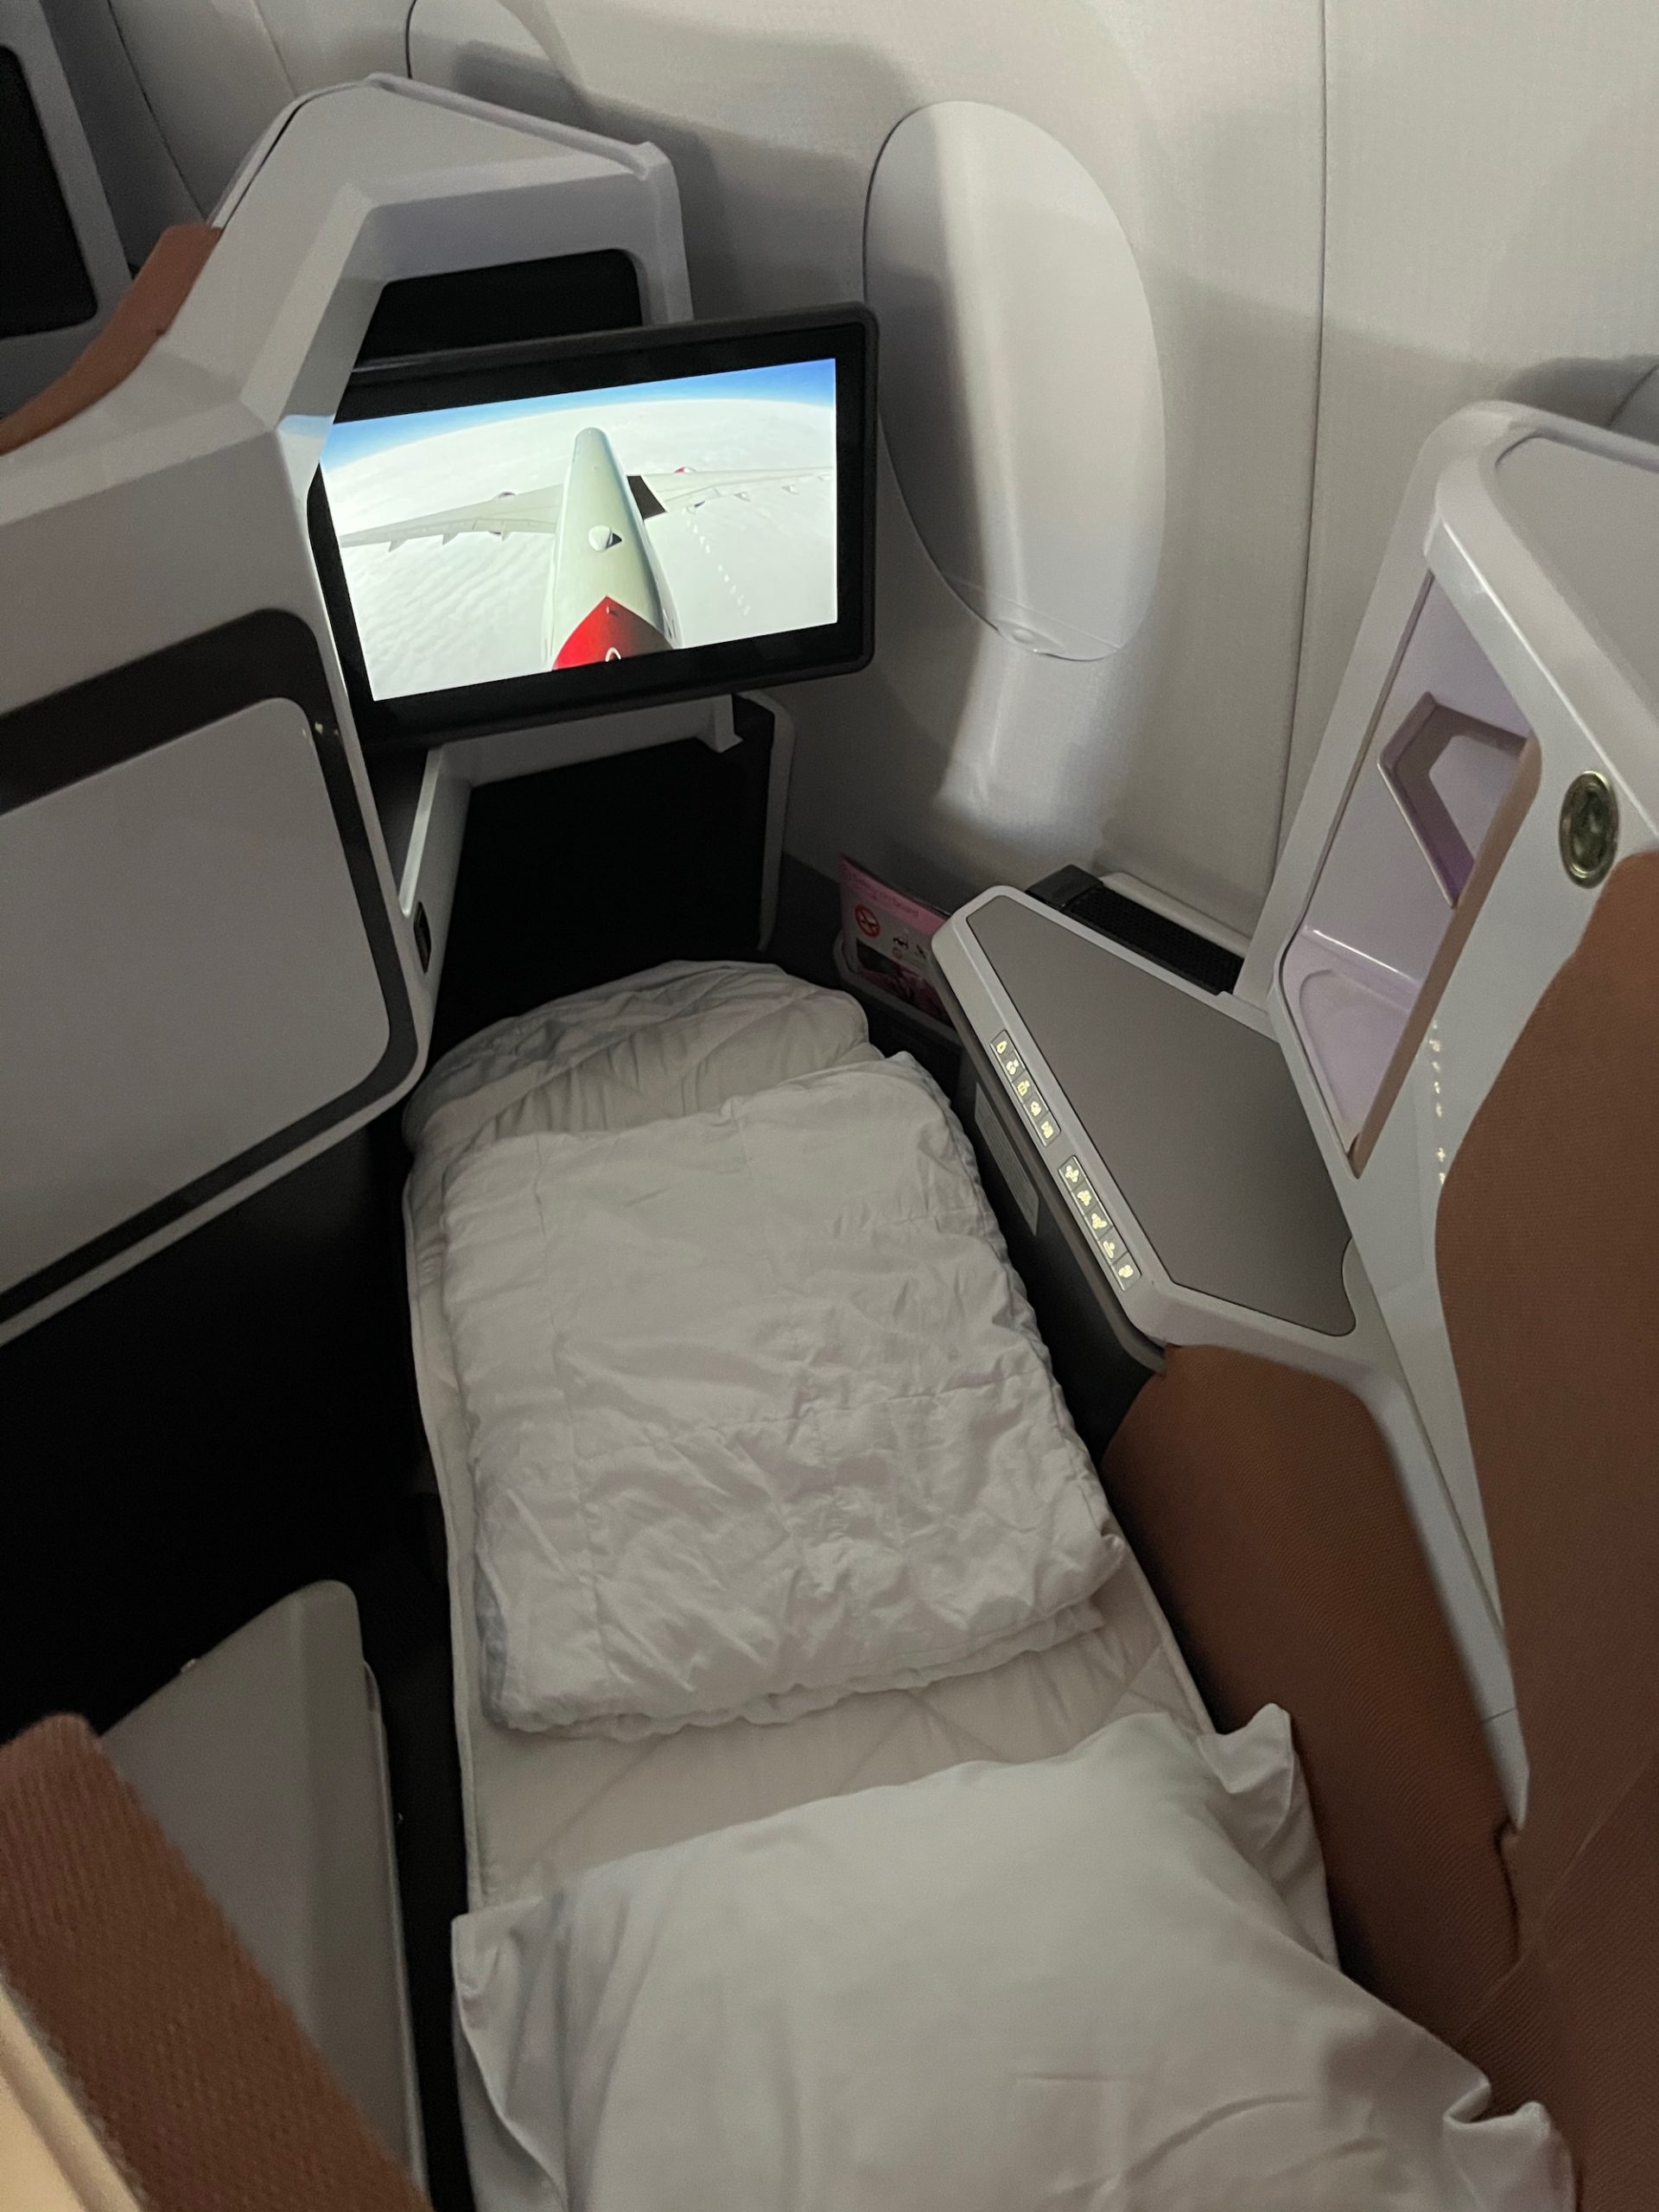 a bed and a tv in a plane